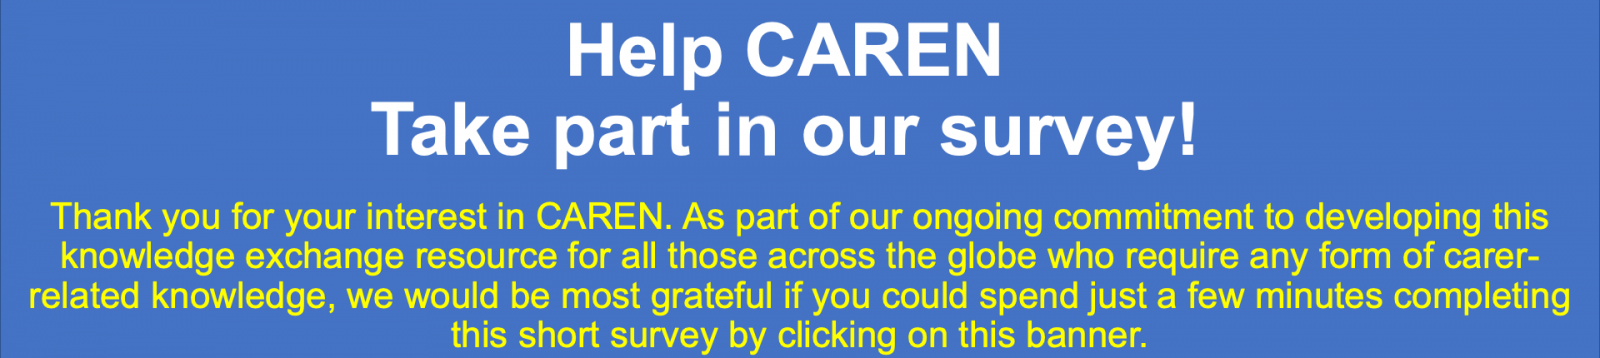 Help CAREN, Take part to the survey. Thank you for your interest in CAREN. As part of our ongoing commitment to developing this knowledge exchange resource for all those across the globe who require any form of carer-related knowledge, we would be most grateful if you could spend just a few minutes completing this short survey by clicking on this banner.